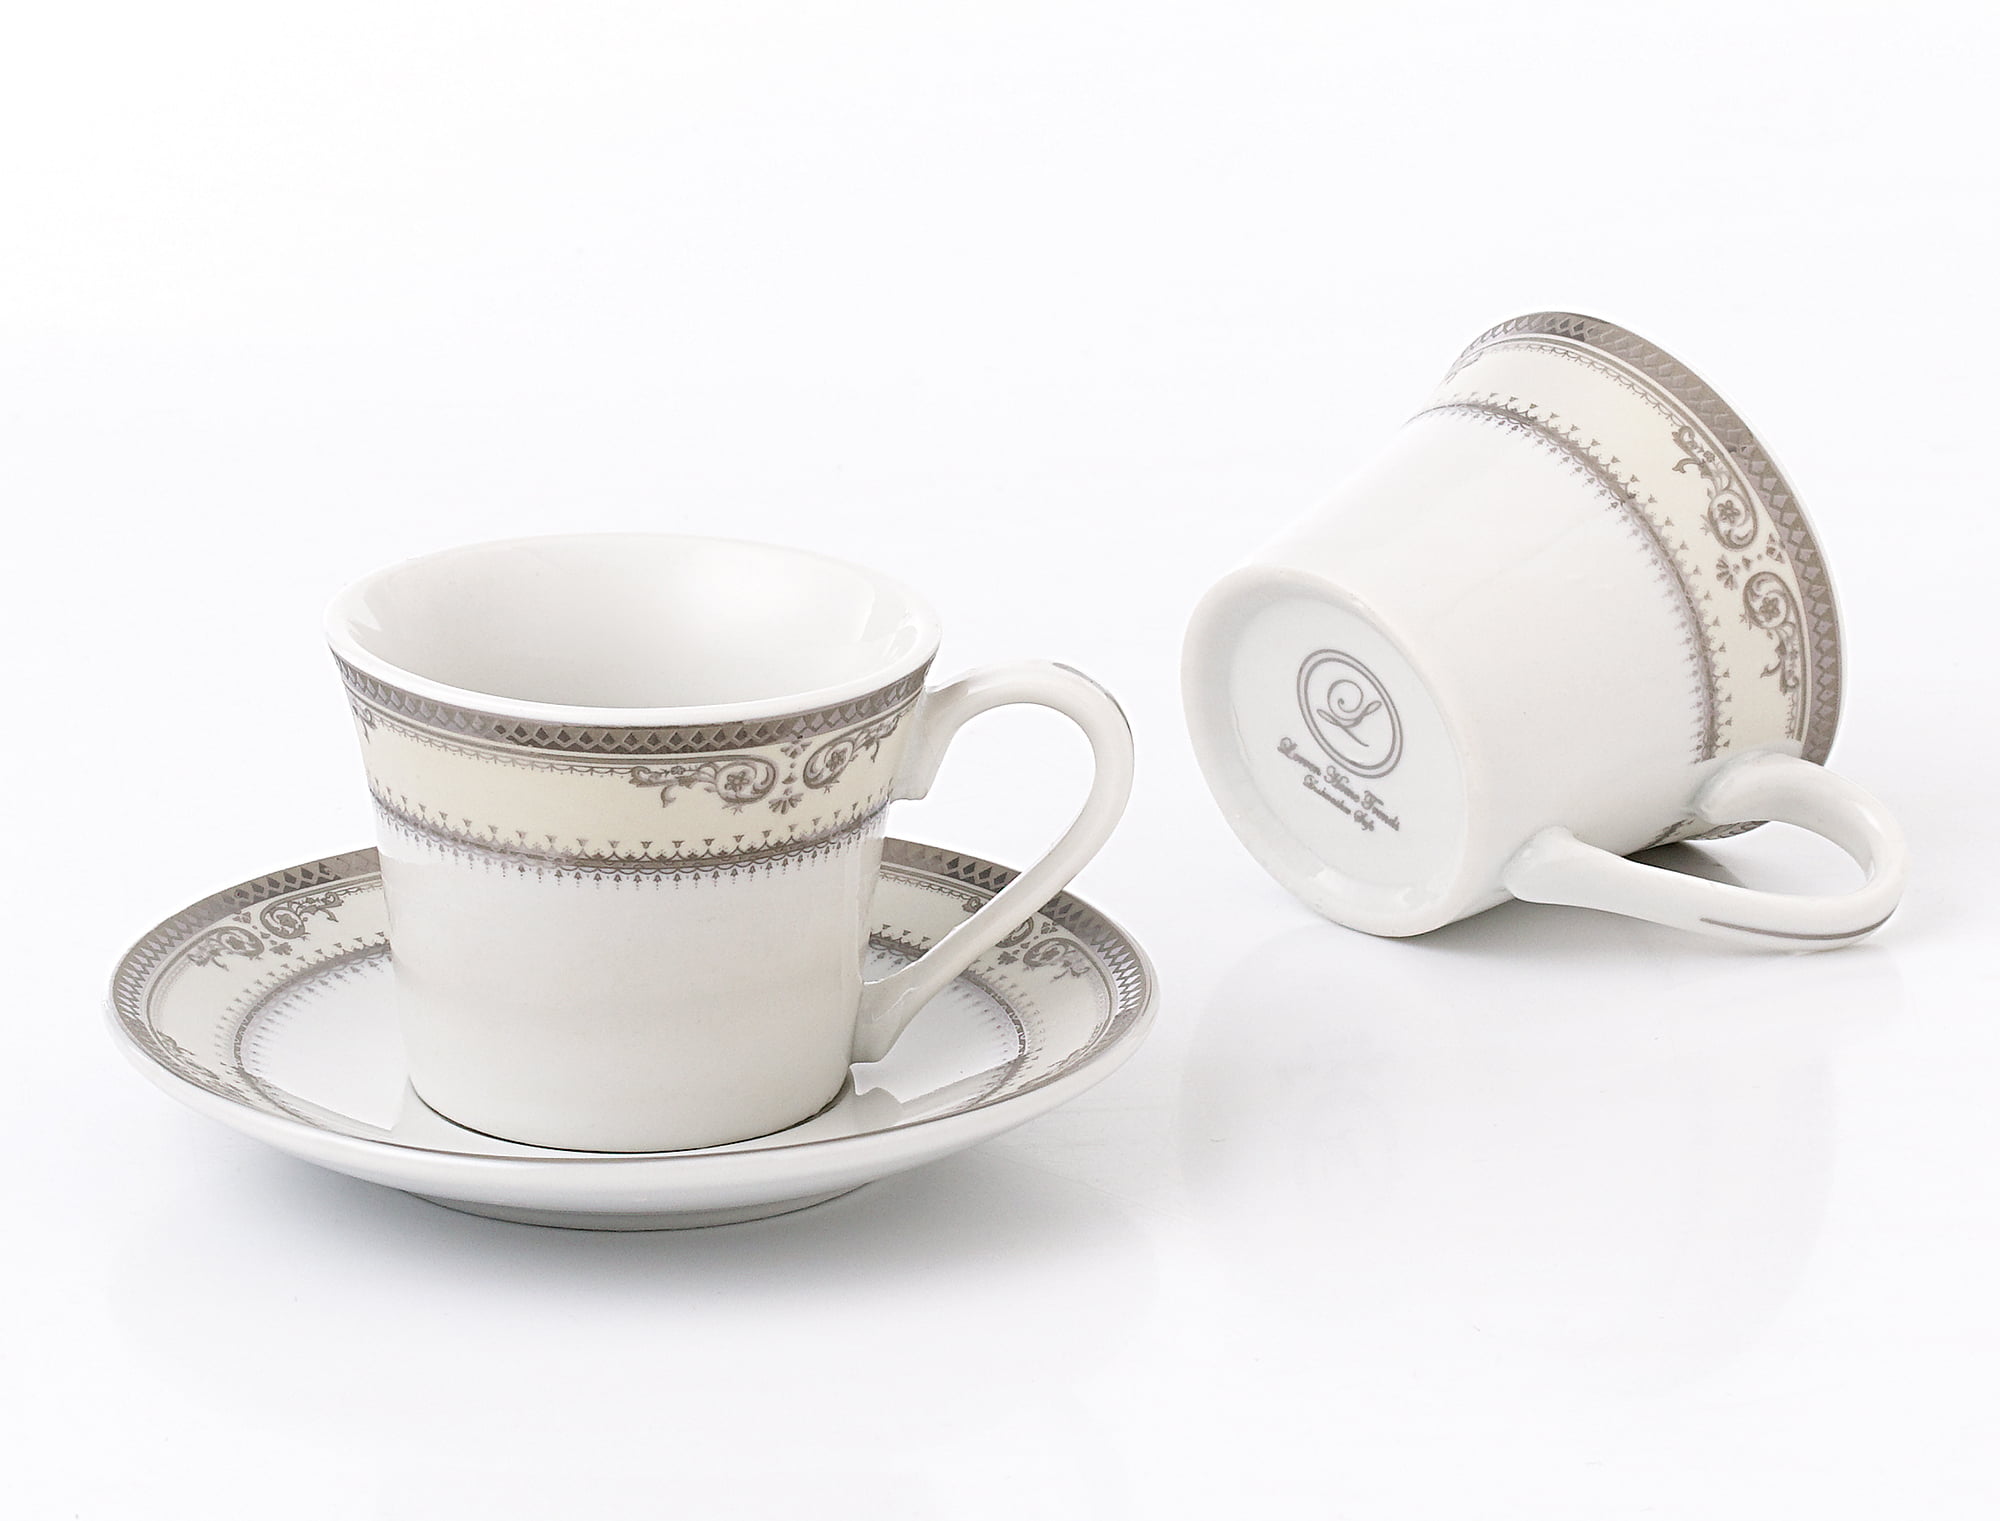 Selamica Ceramic 2.8 oz Espresso Cups, Small Expresso Coffee Cup Set with  Saucers, Cappuccino Cups S…See more Selamica Ceramic 2.8 oz Espresso Cups